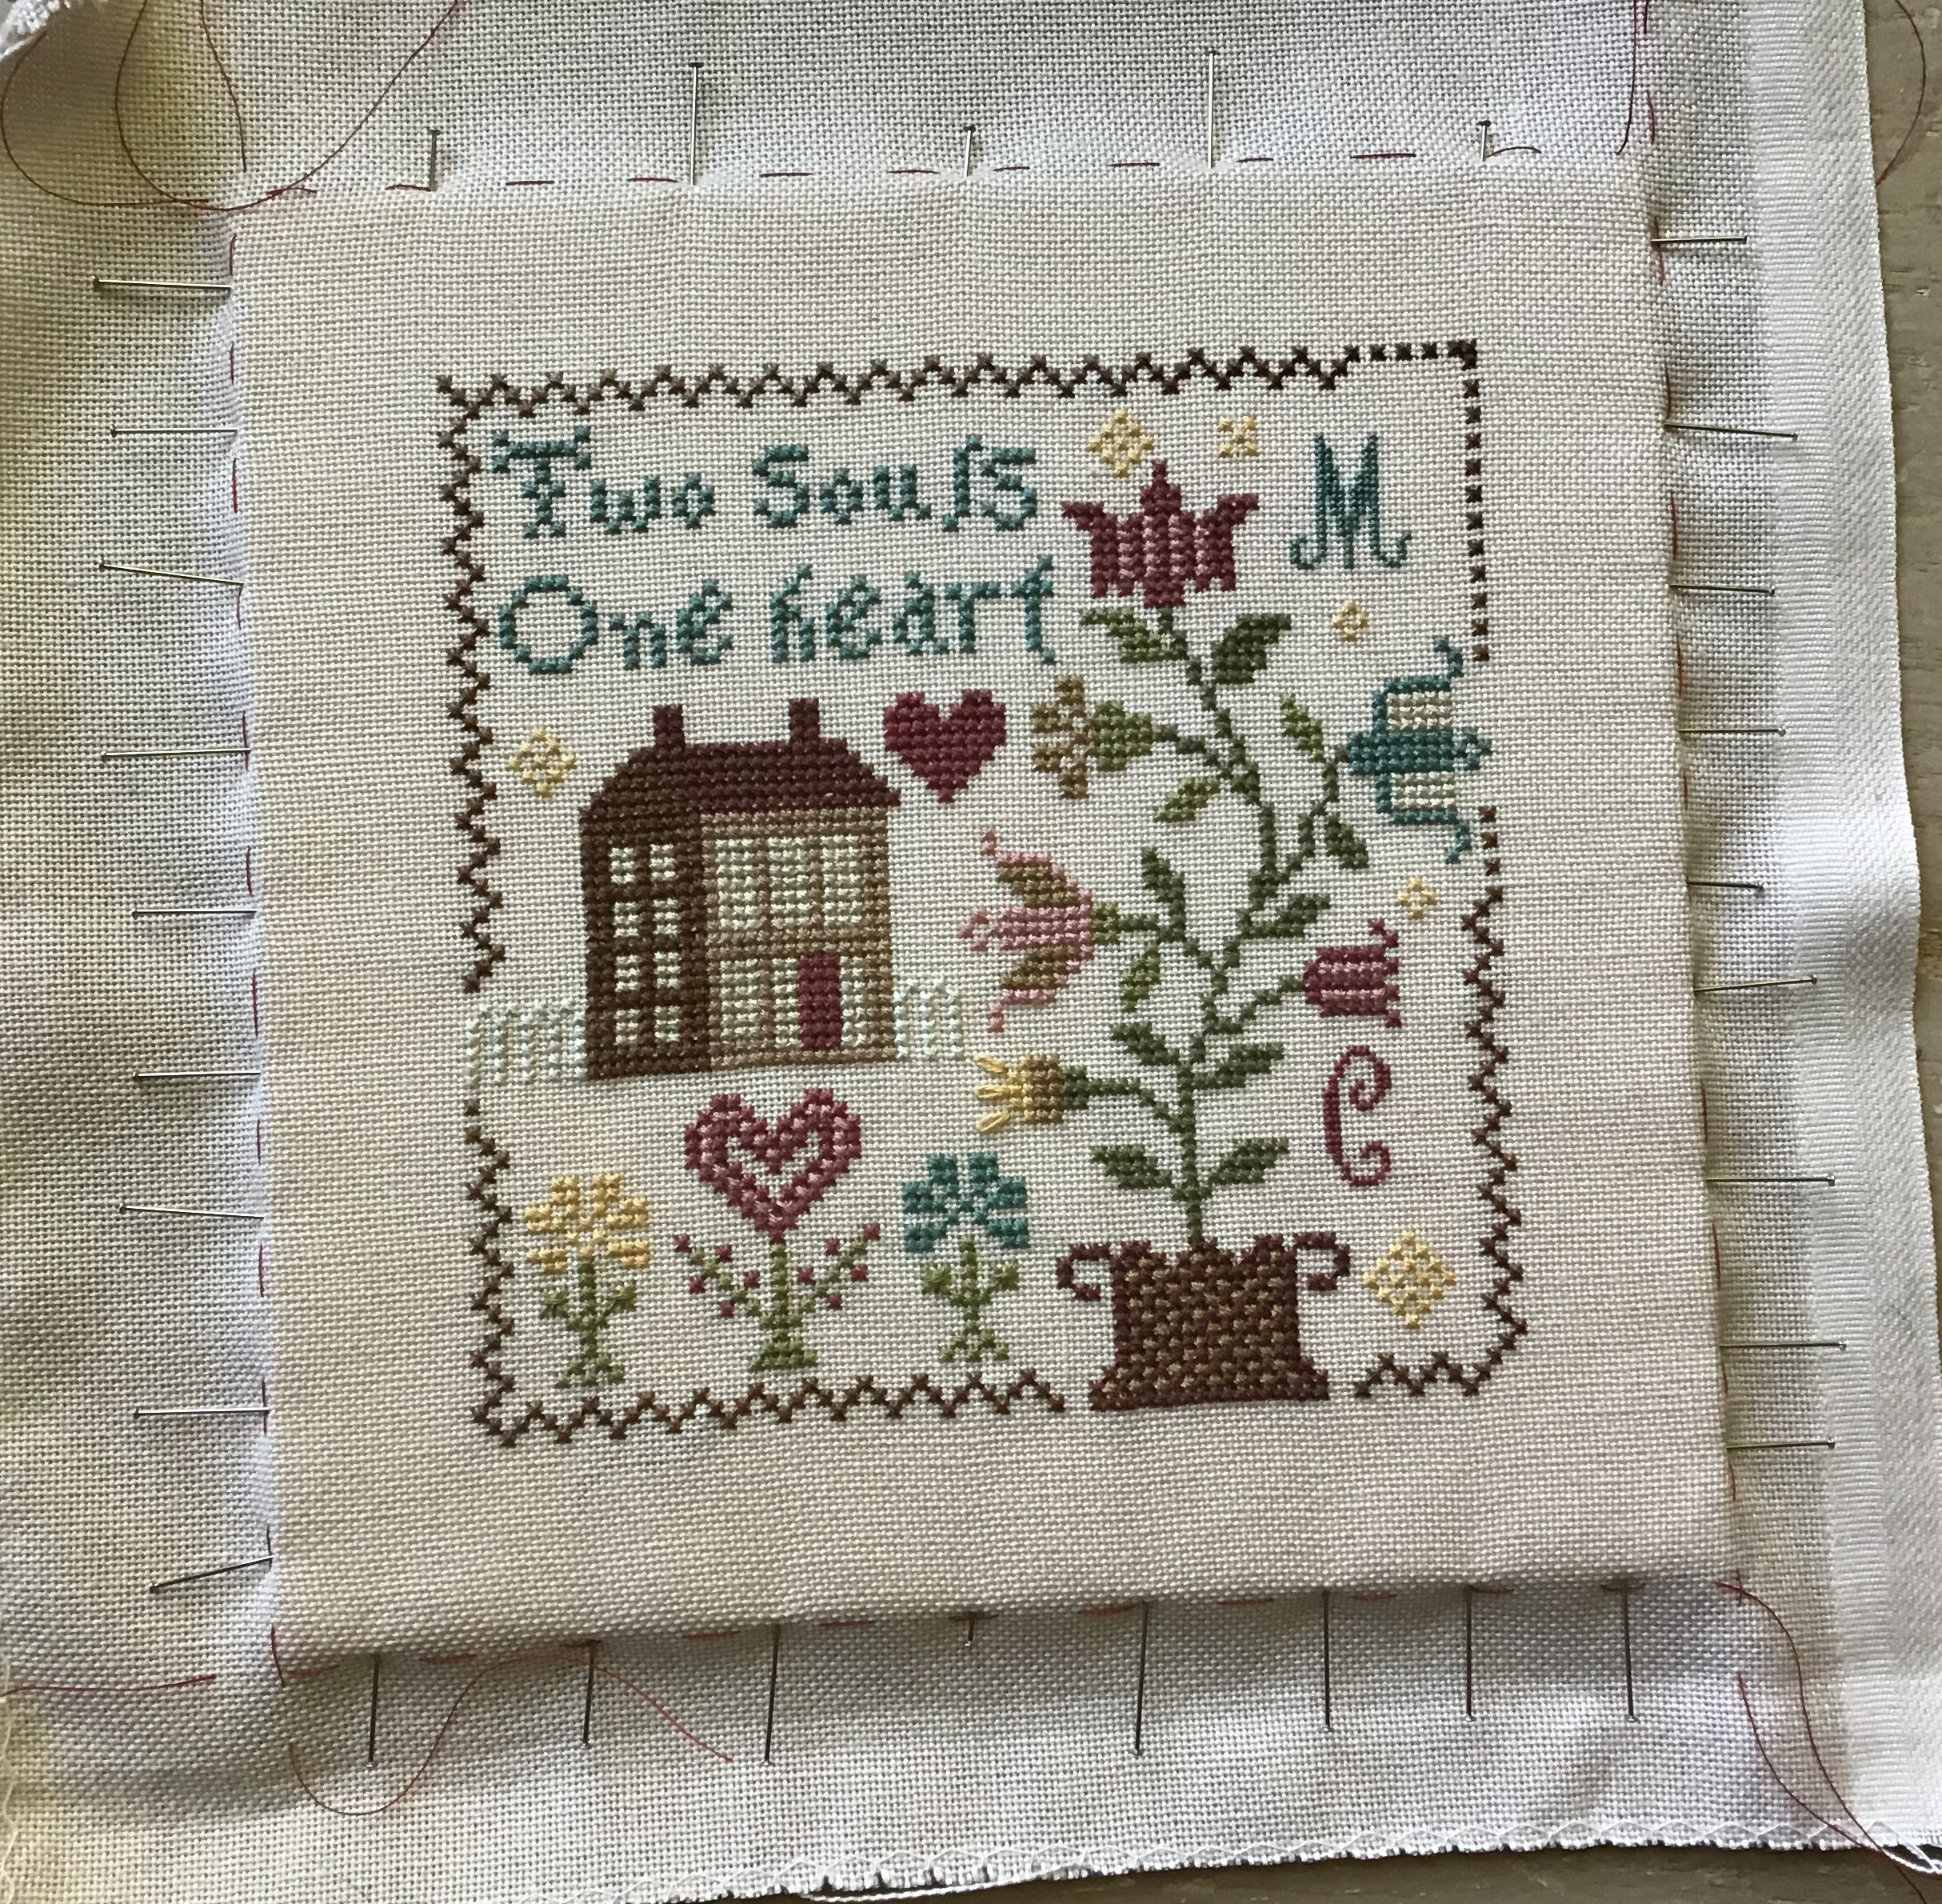 How To Frame a Cross Stitch